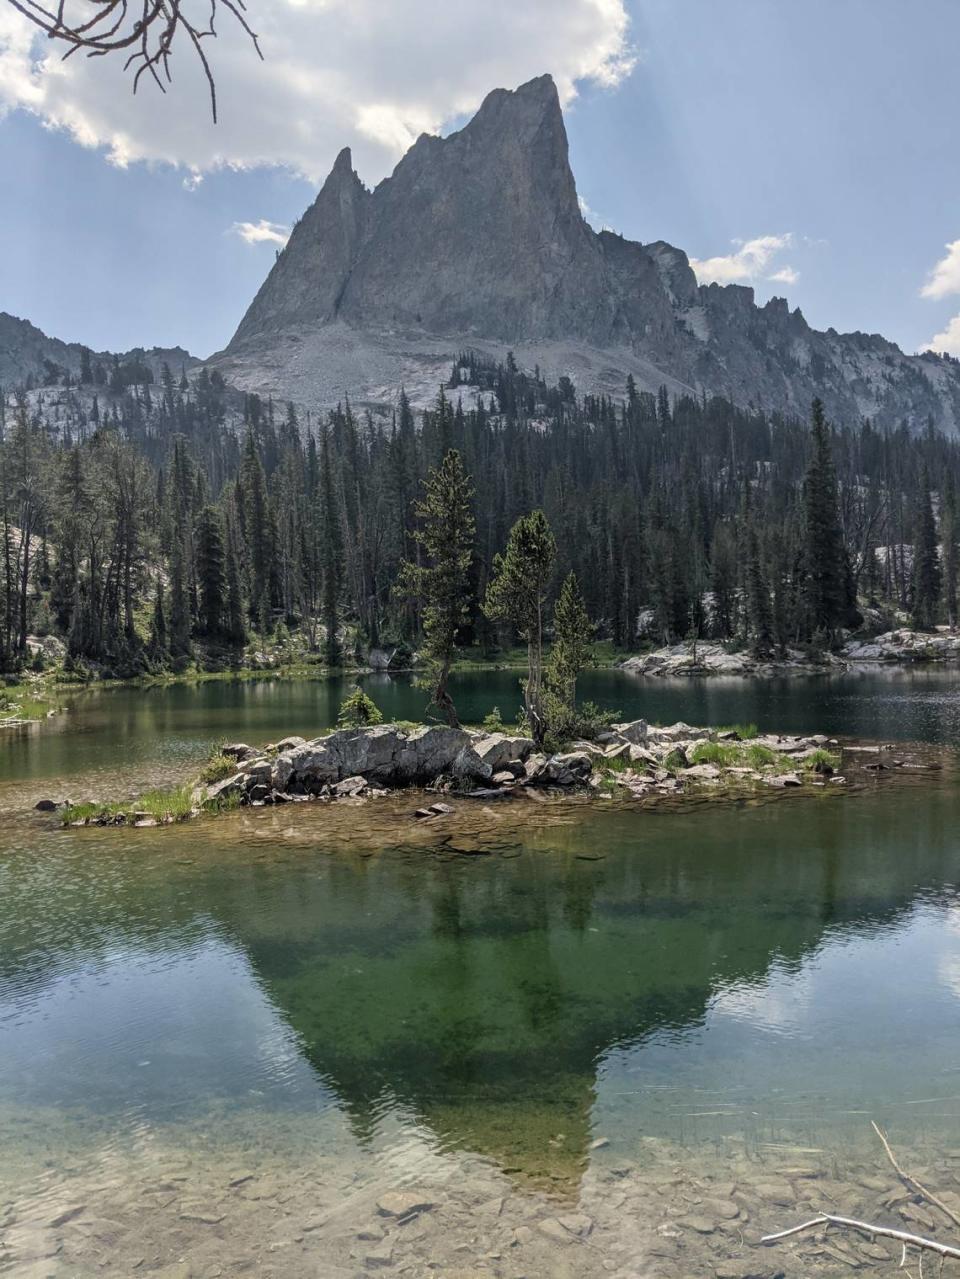 Idaho’s version of El Capitan can be seen from Alice Lake, about a 6-mile hike from Tin Cup Trailhead south of Stanley. Hayat Norimine